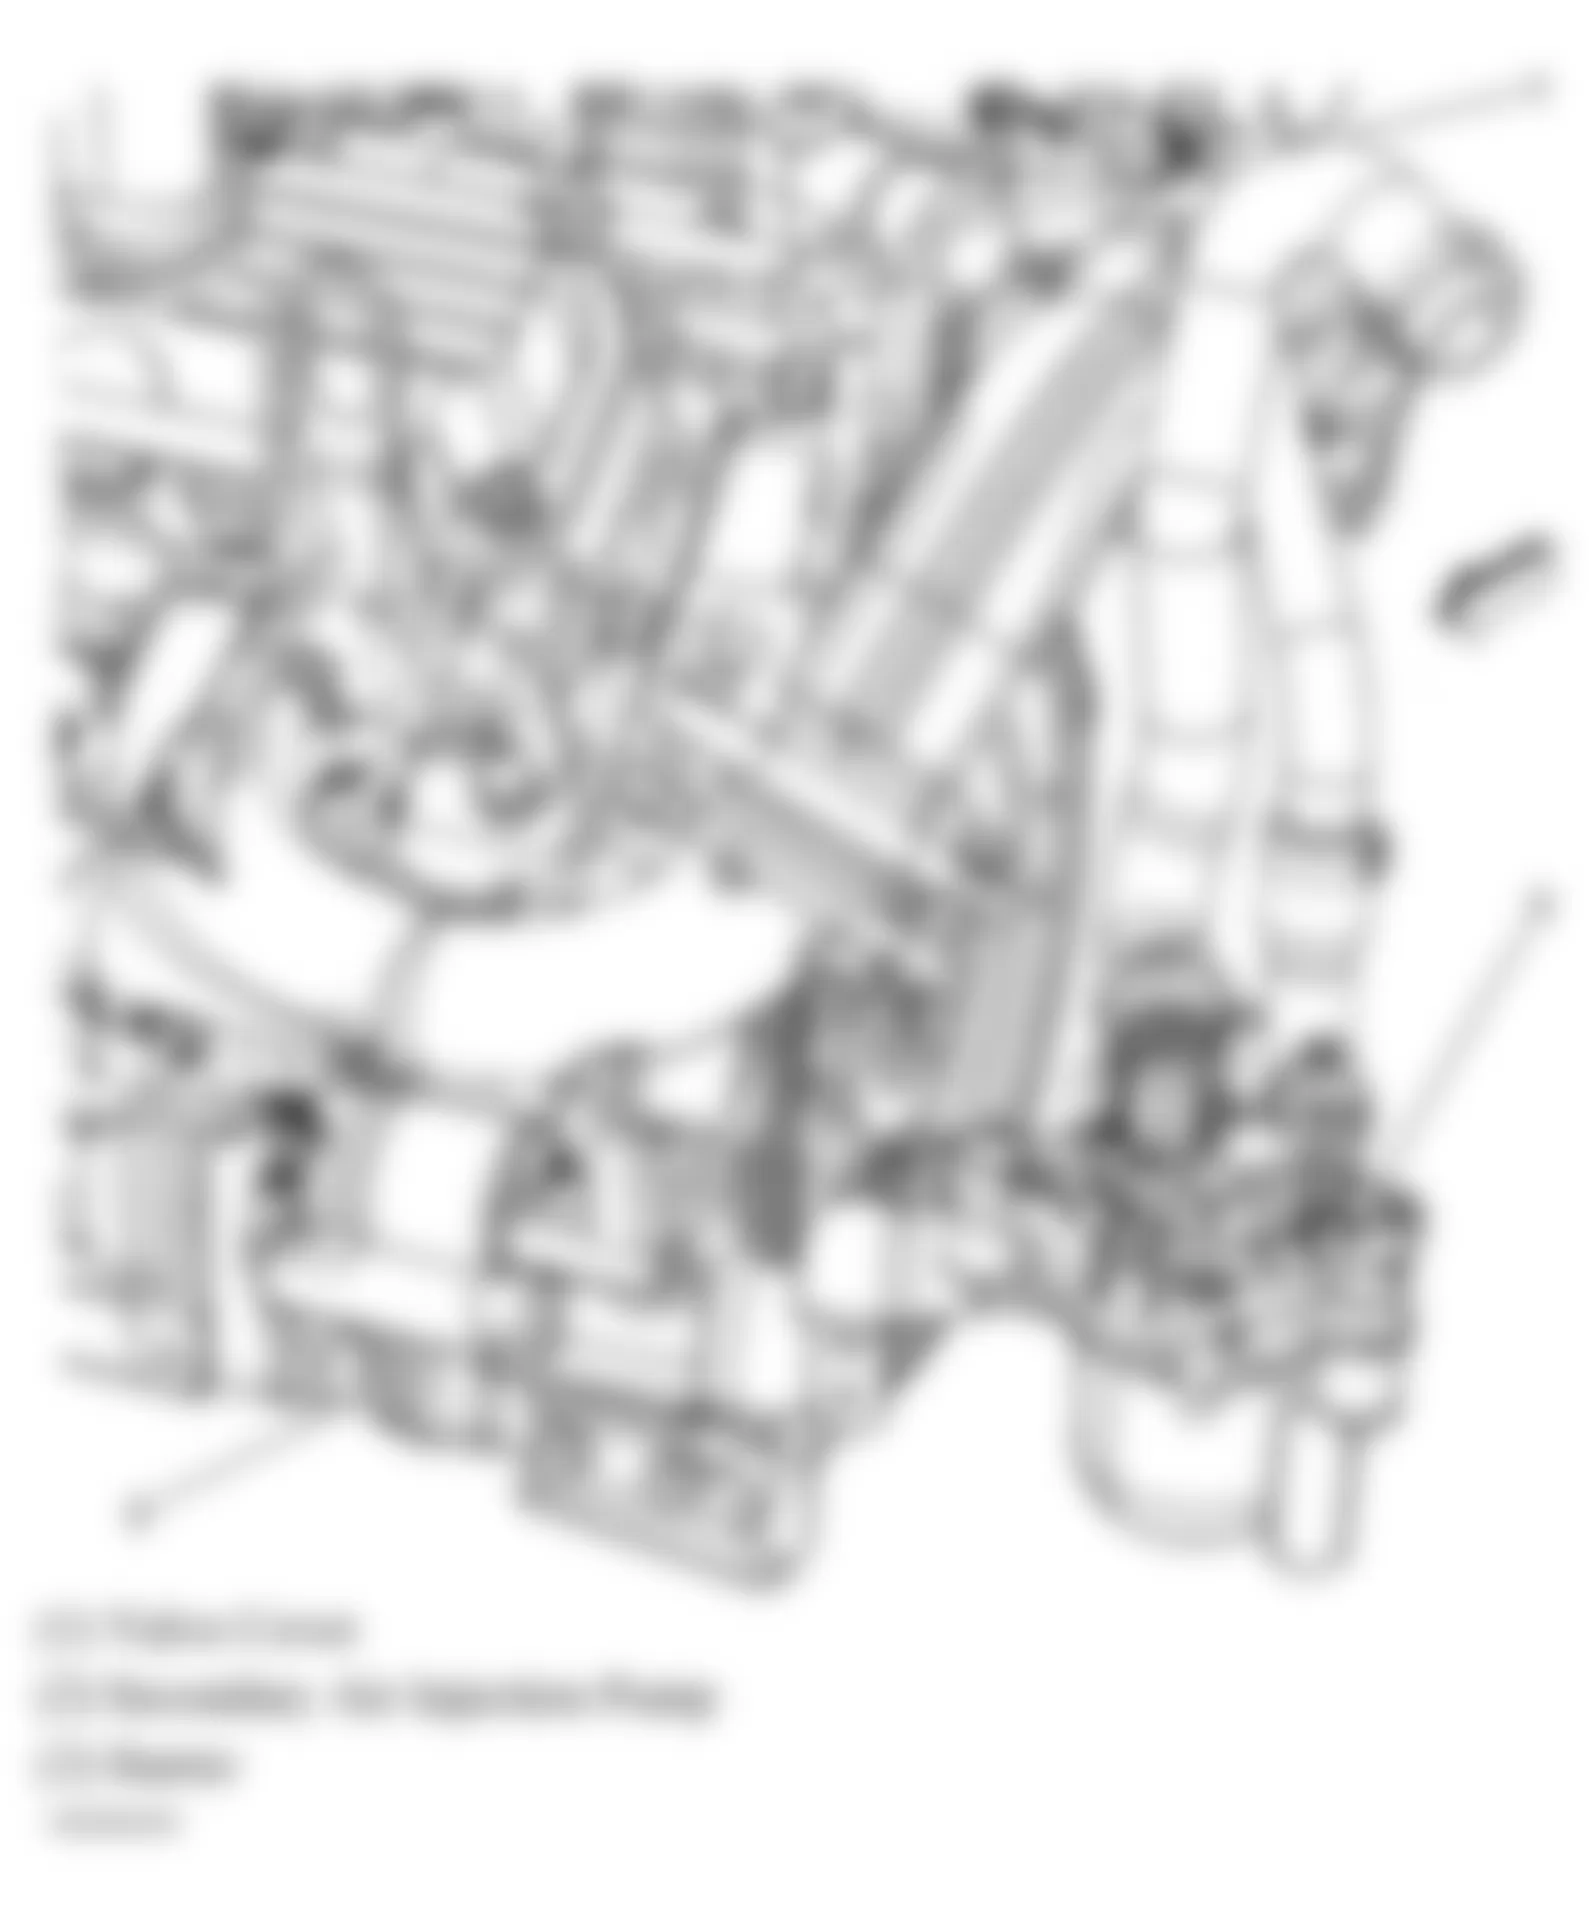 Buick Allure CX 2005 - Component Locations -  Left Rear Of Engine (3.8L)